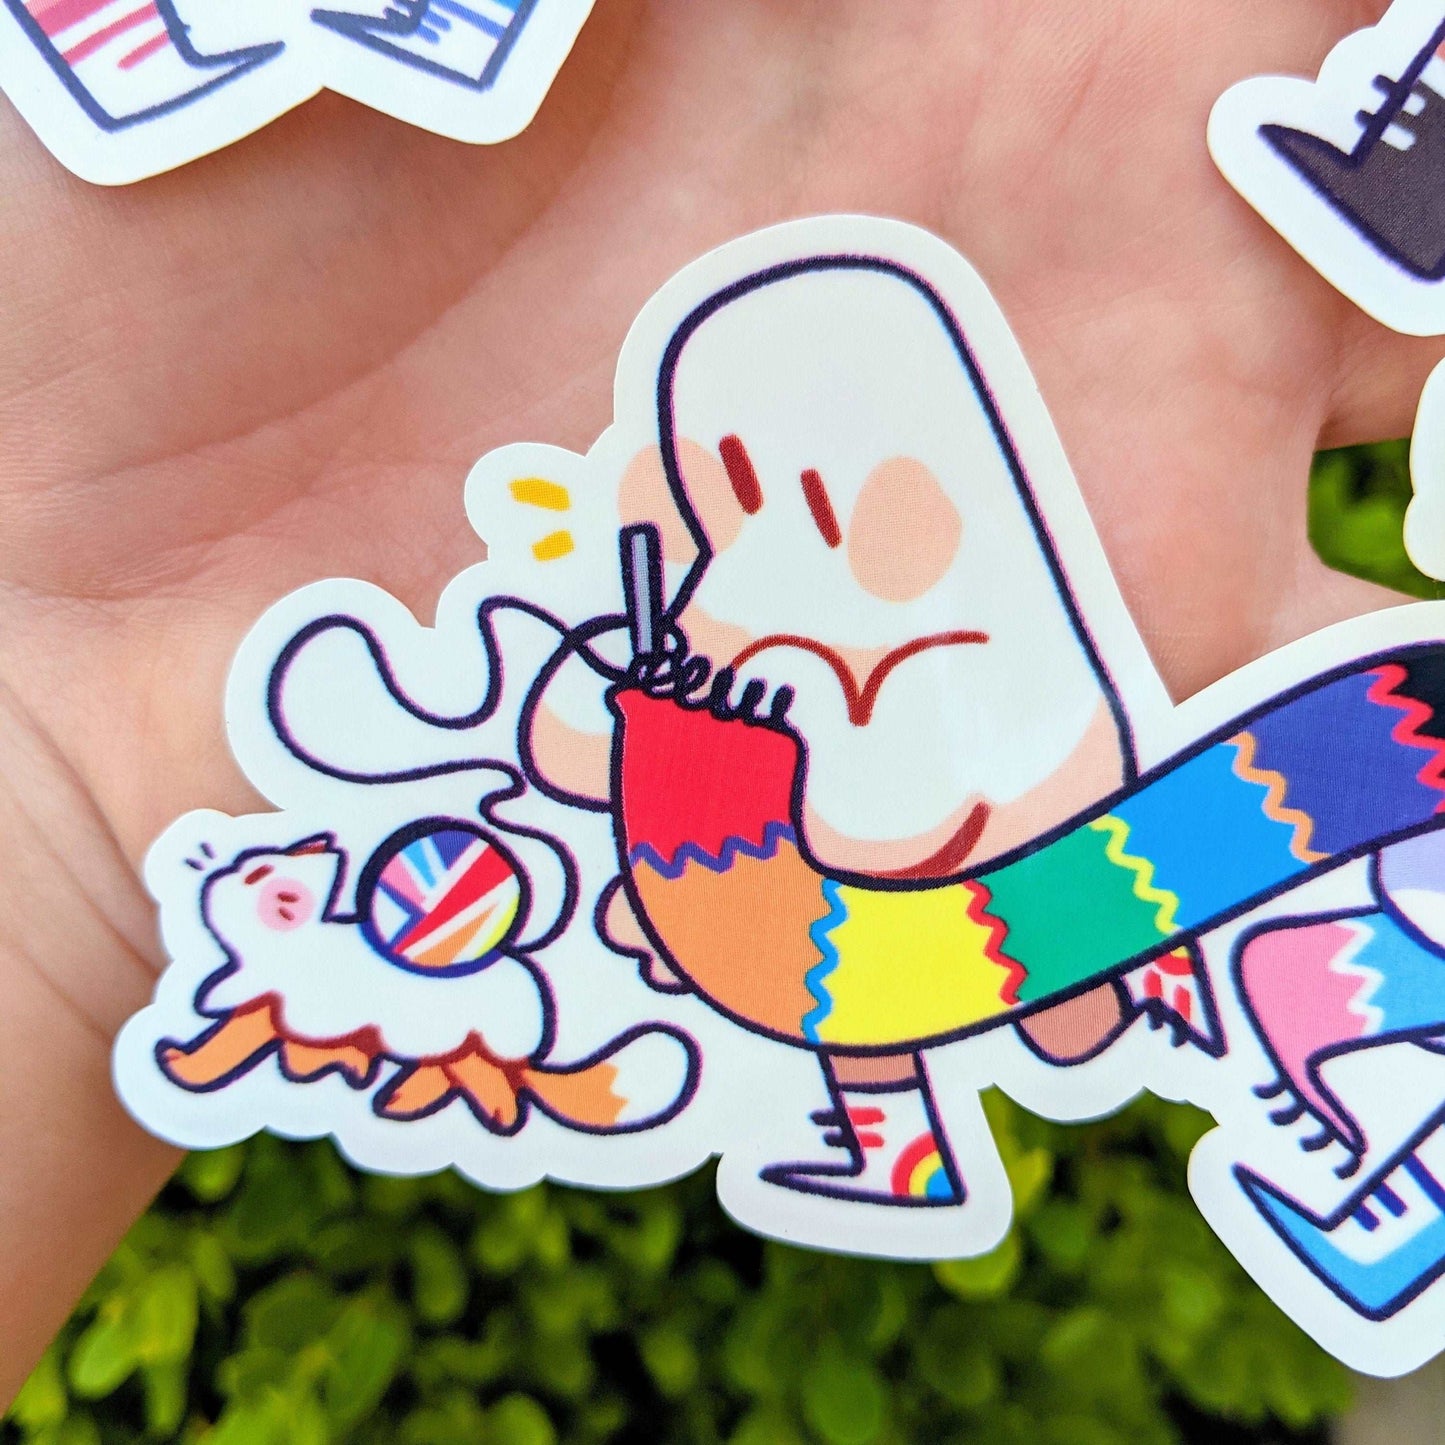 Pride Parade Ghost Stickers!